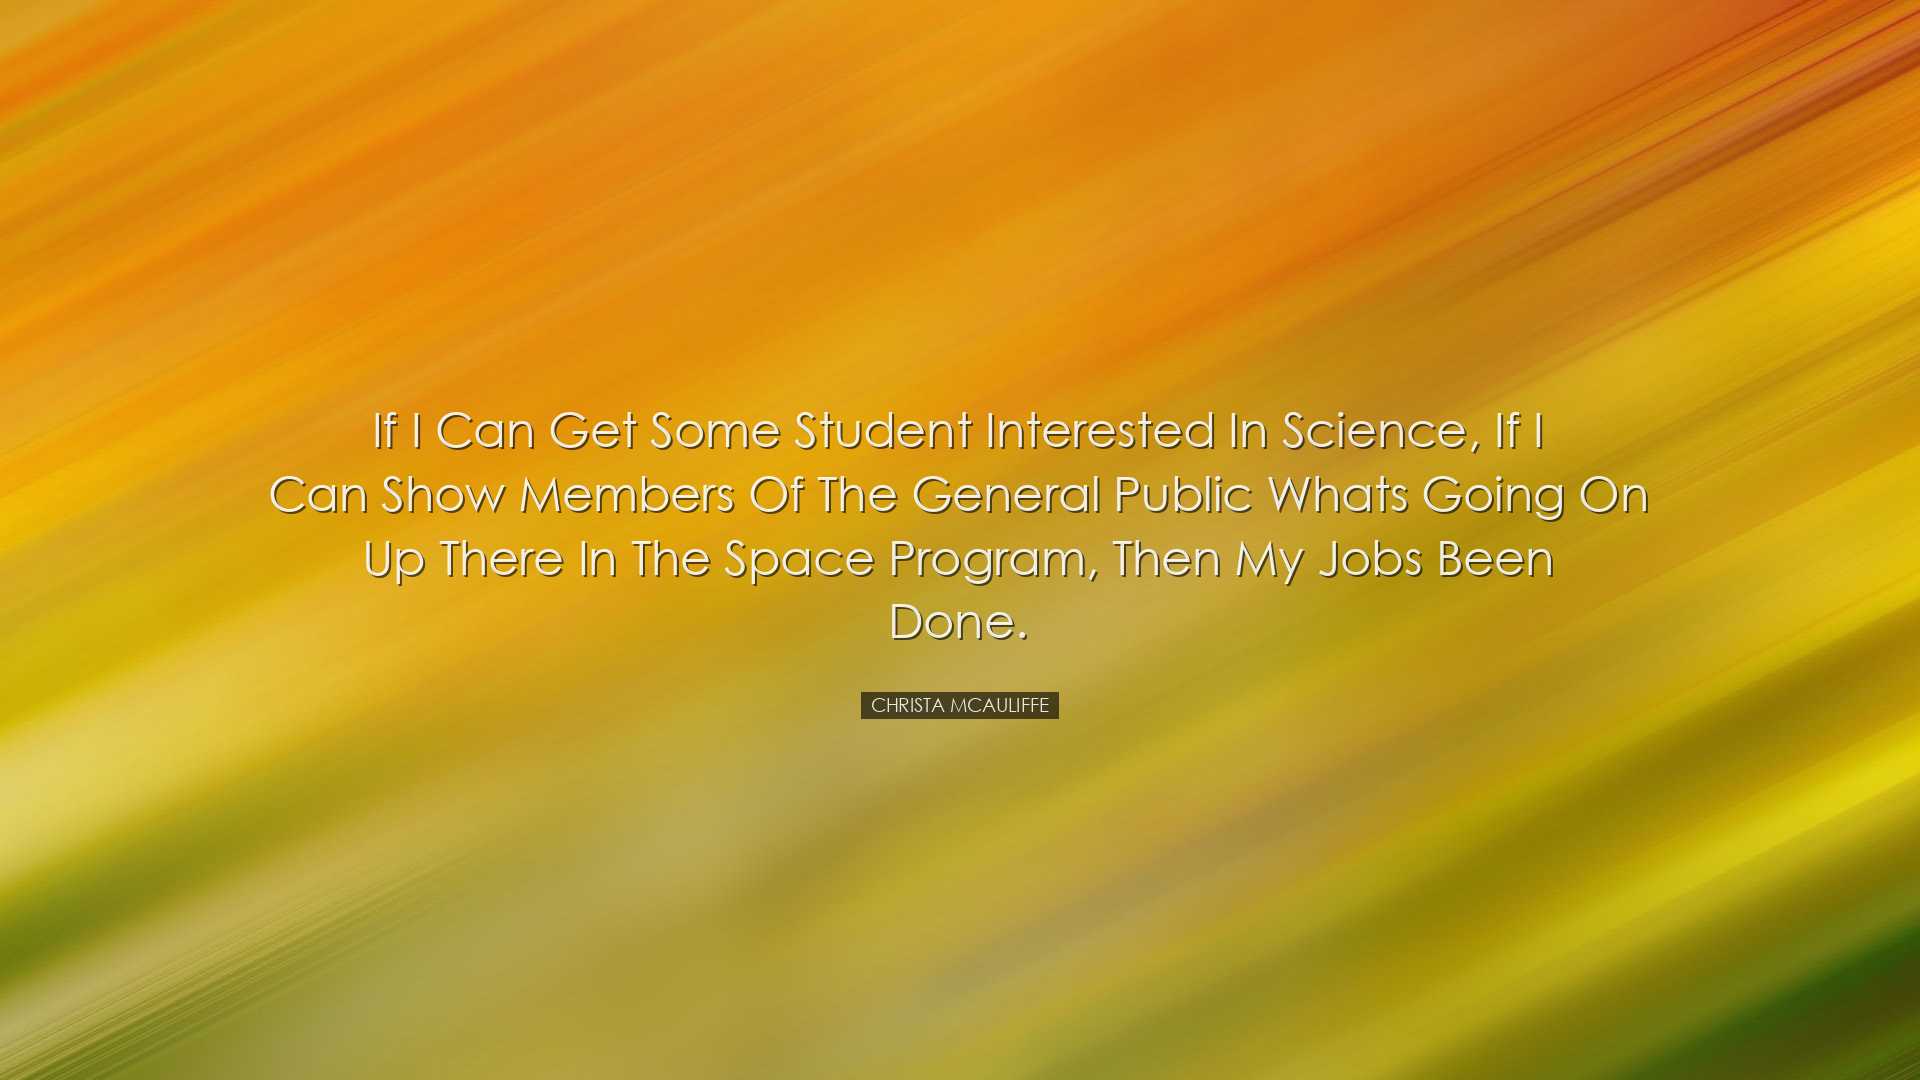 If I can get some student interested in science, if I can show mem